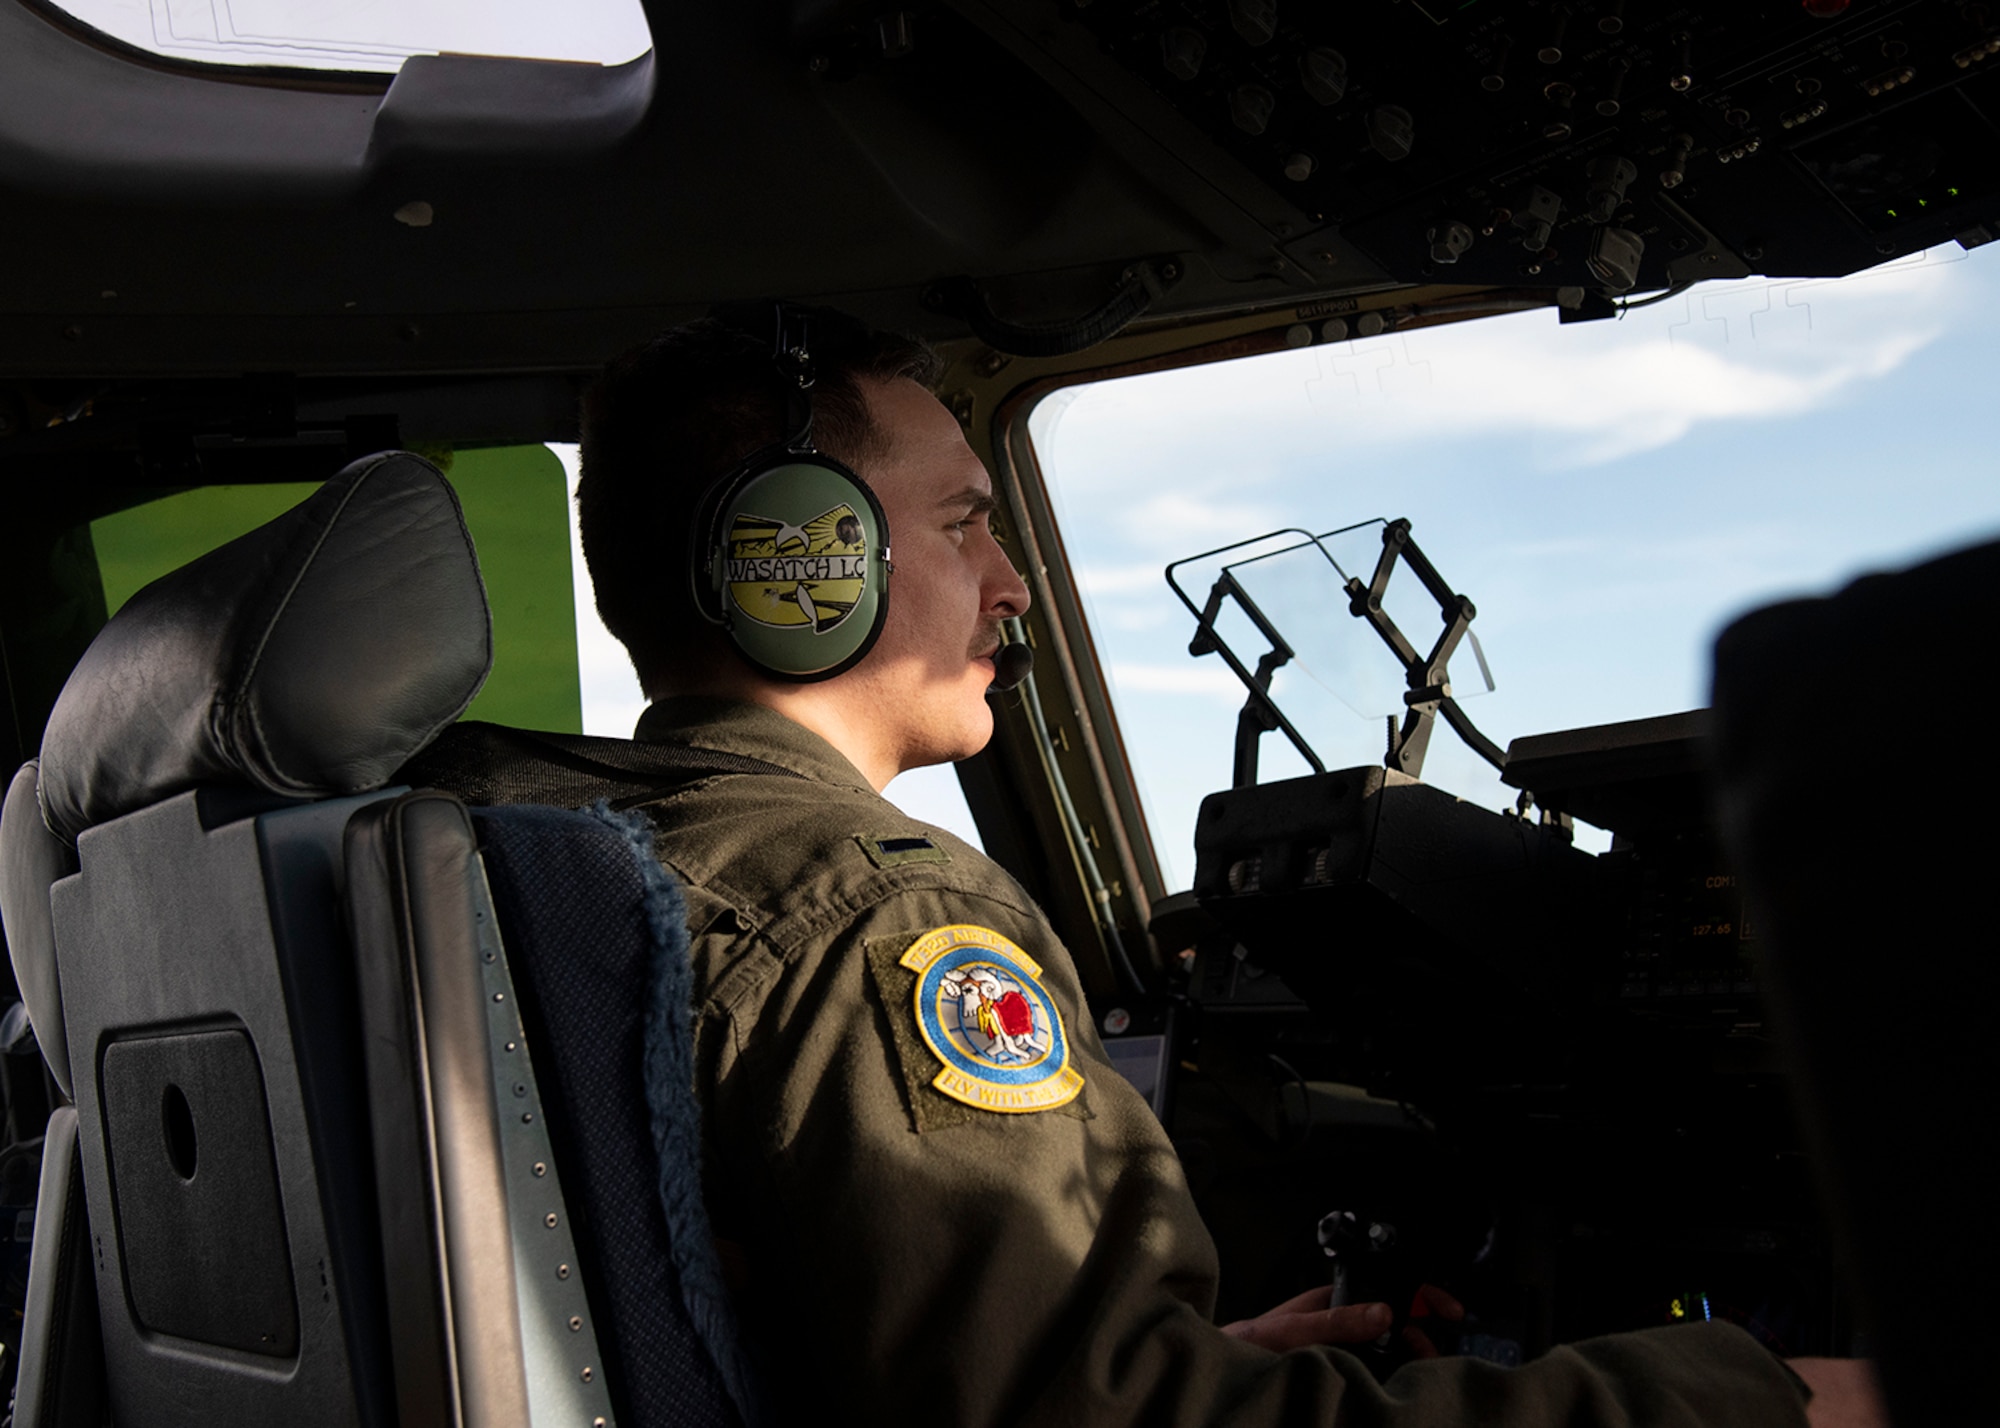 1st Lt. Nolan Lynn, a C-17 Globemaster III pilot with the 732 Airlift Squadron from Joint Base McGuire-Dix-Lakehurst, N.J., participates in Exercise Jersey Devil 19, March 4, 2019. Jersey Devil was aimed at preparing Airmen to respond to complex threats anywhere, anytime. (U.S. Air Force photo by Airman 1st Class Zoe M. Wockenfuss)